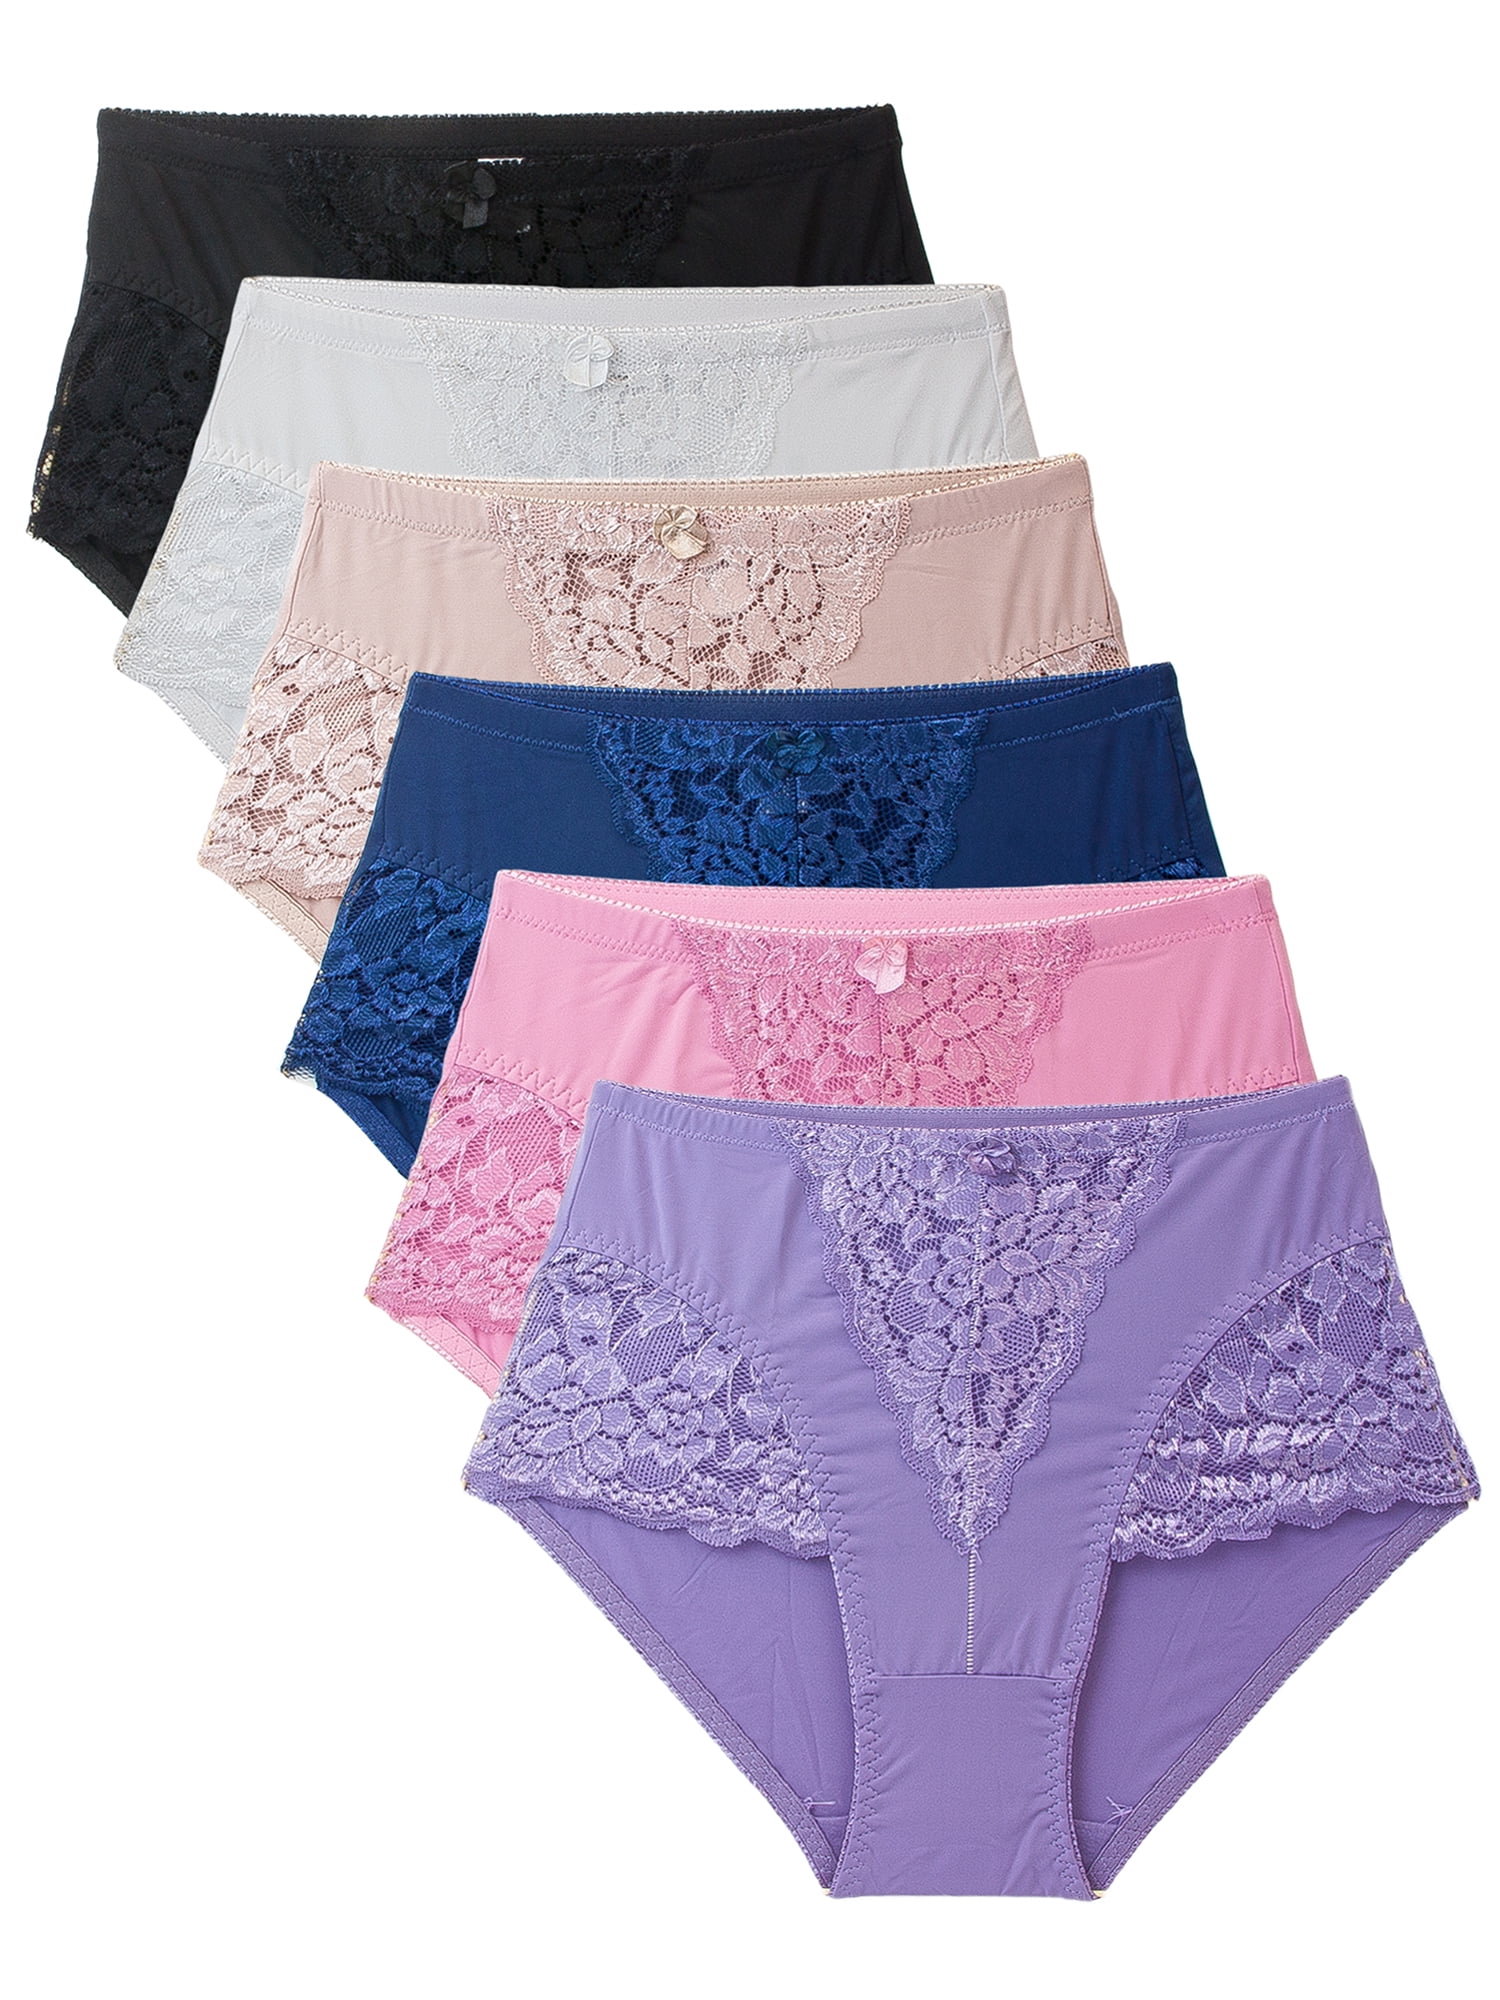 Womens Panties S-Plus Size Light Control Full Cover Lace Girdle ...